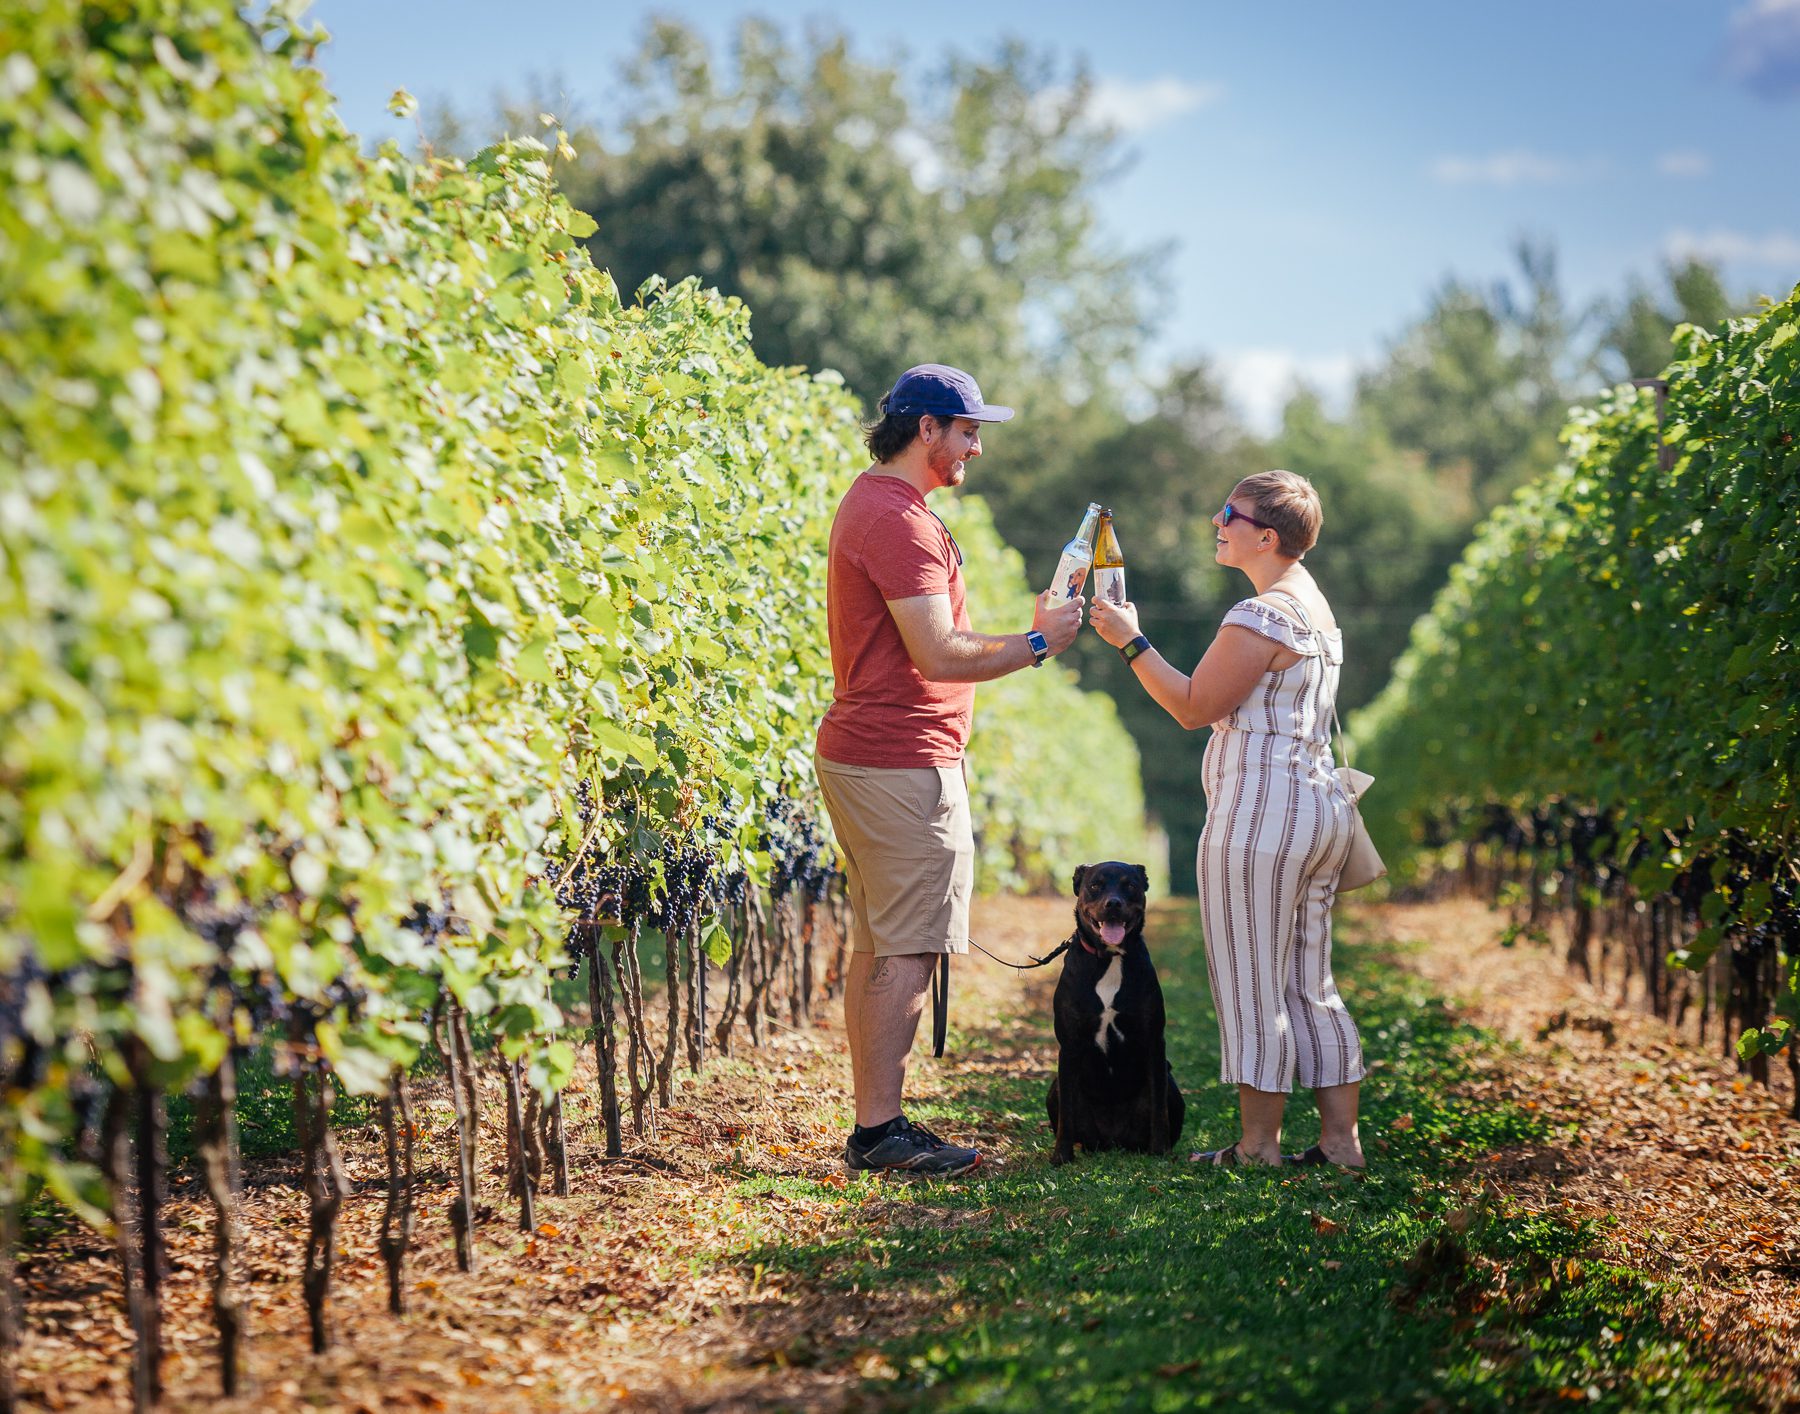 Dan and Nina (and their dog RD) from Hamilton enjoy cider while walking amongst the vineyards on a tour of Hounds of Erie. 